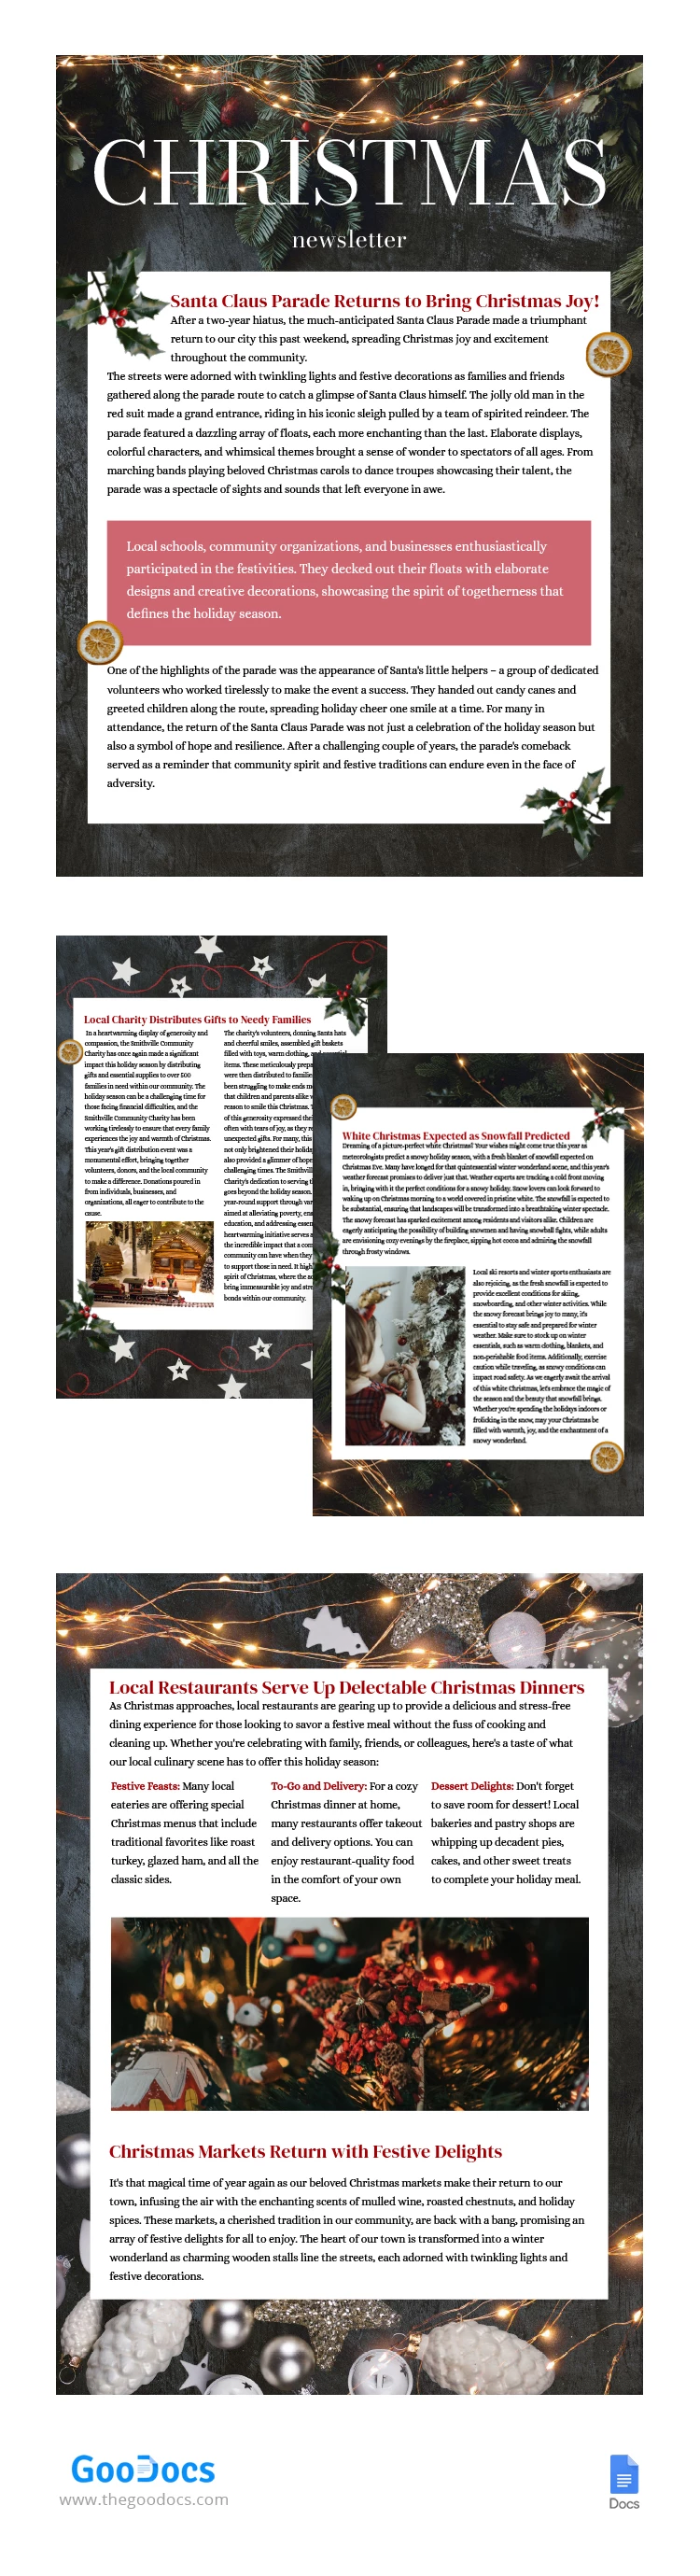 Christmas Spruce Newsletter with Garlands - free Google Docs Template - 10066878